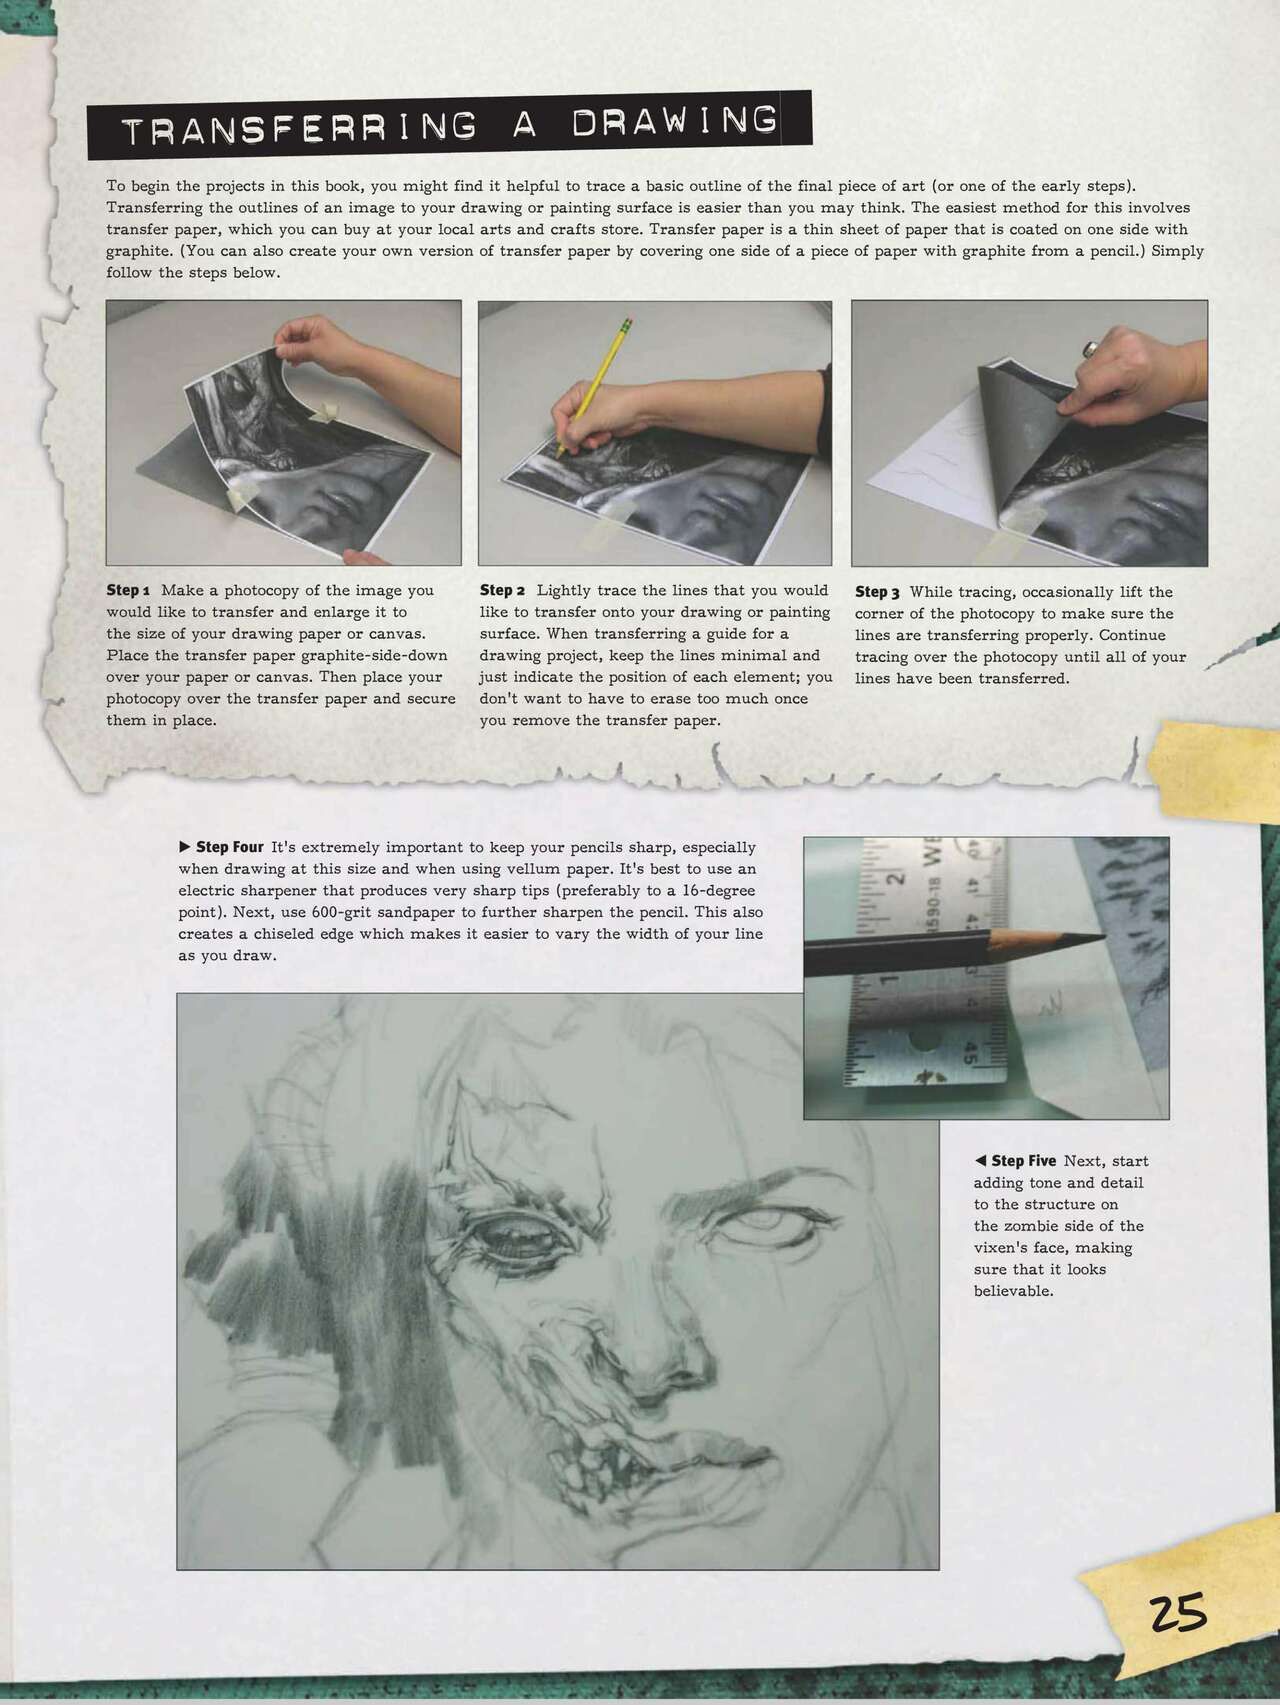 How to Draw Zombies: Discover the secrets to drawing, painting, and illustrating the undead 僵尸描绘集 26